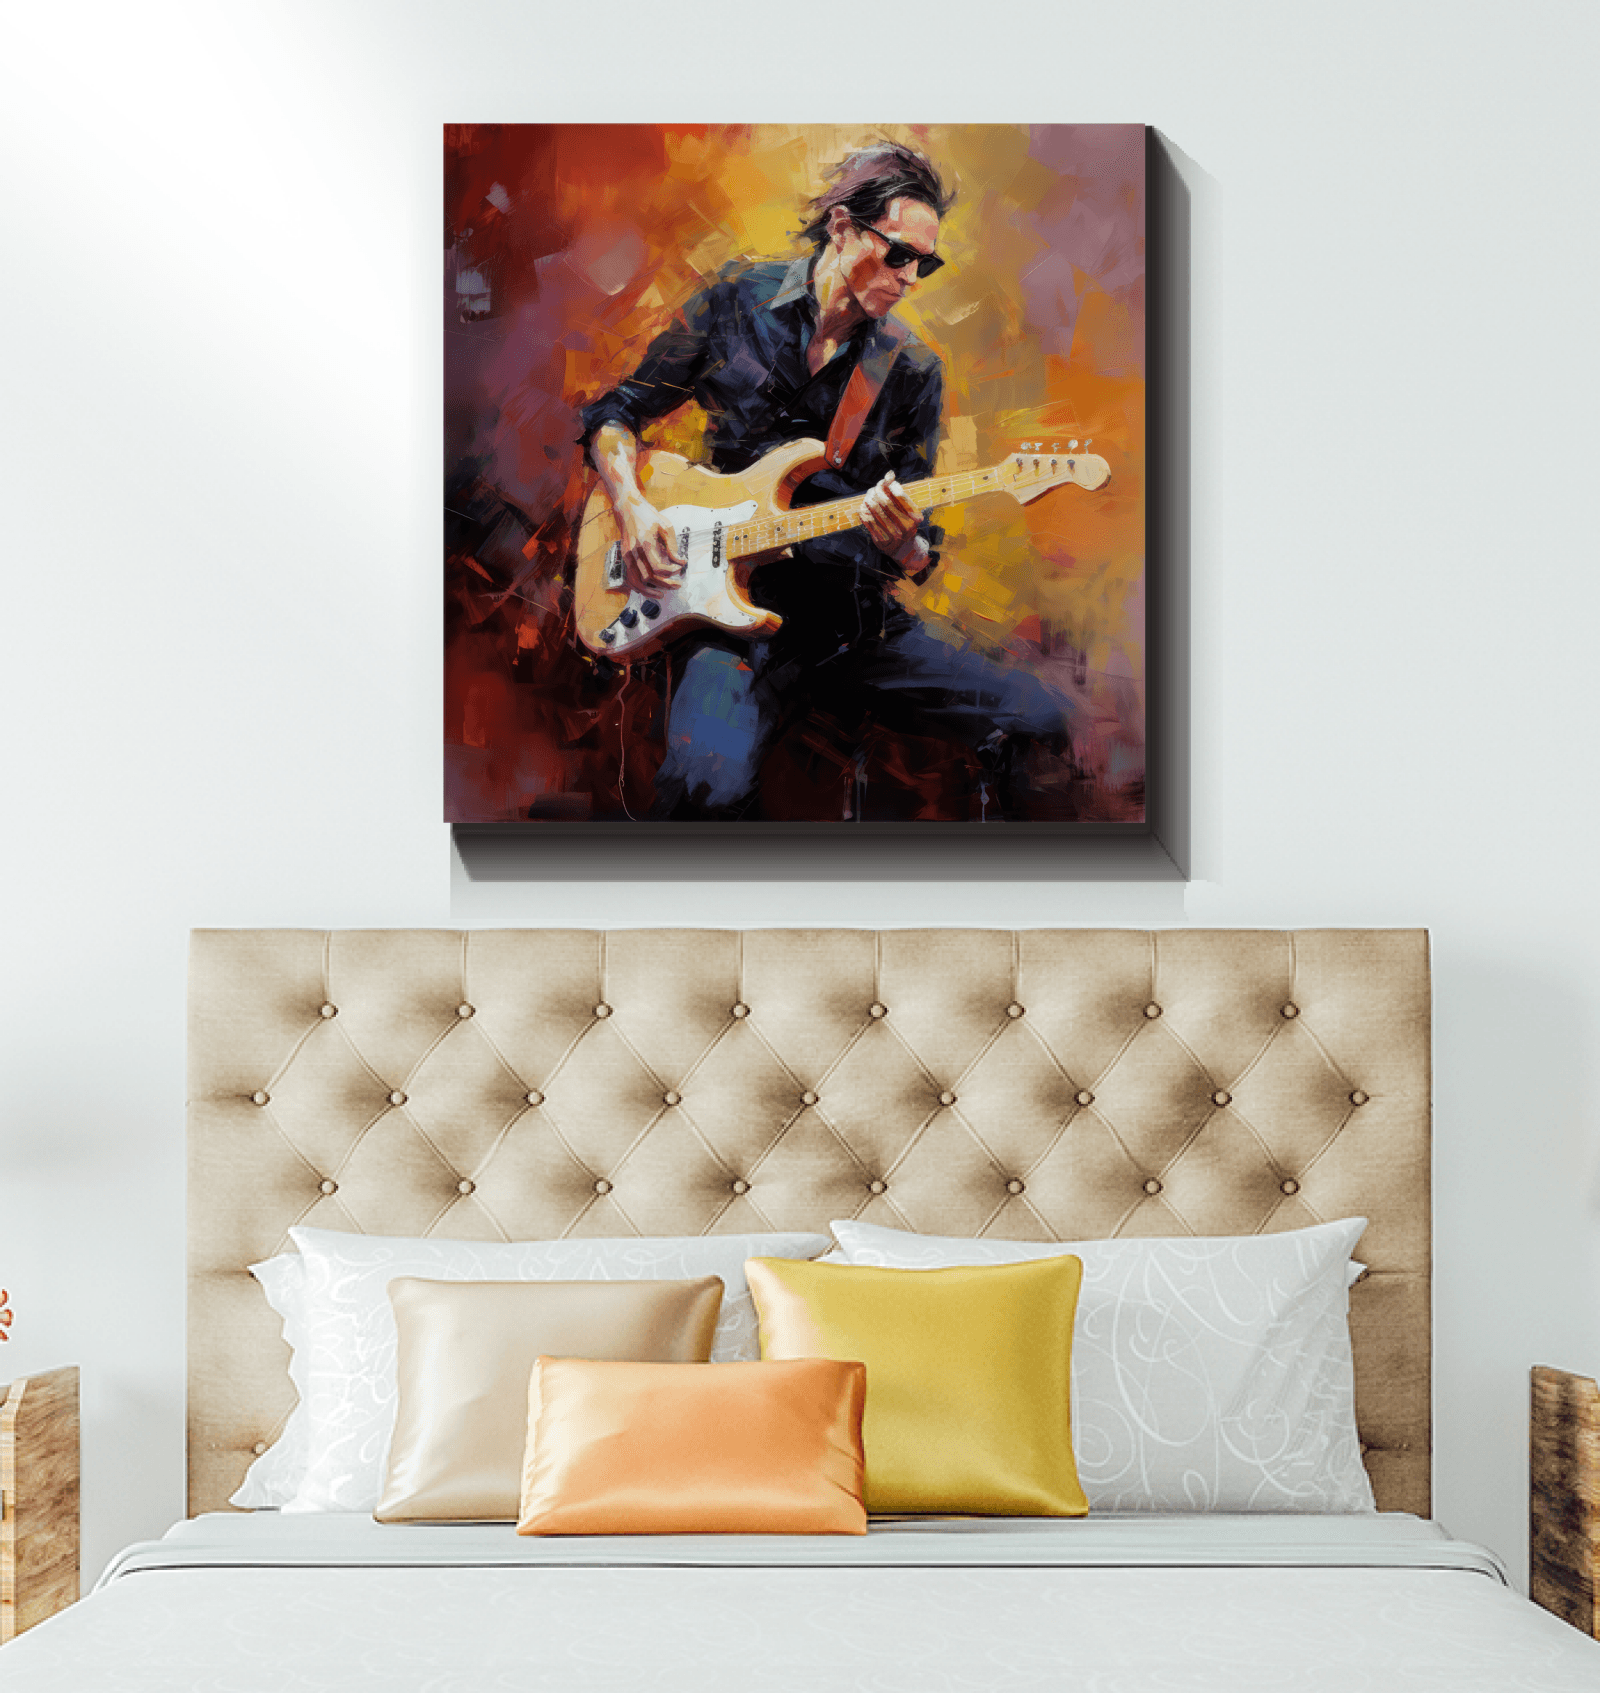 Artistic wrapped canvas with strumming guitar motif